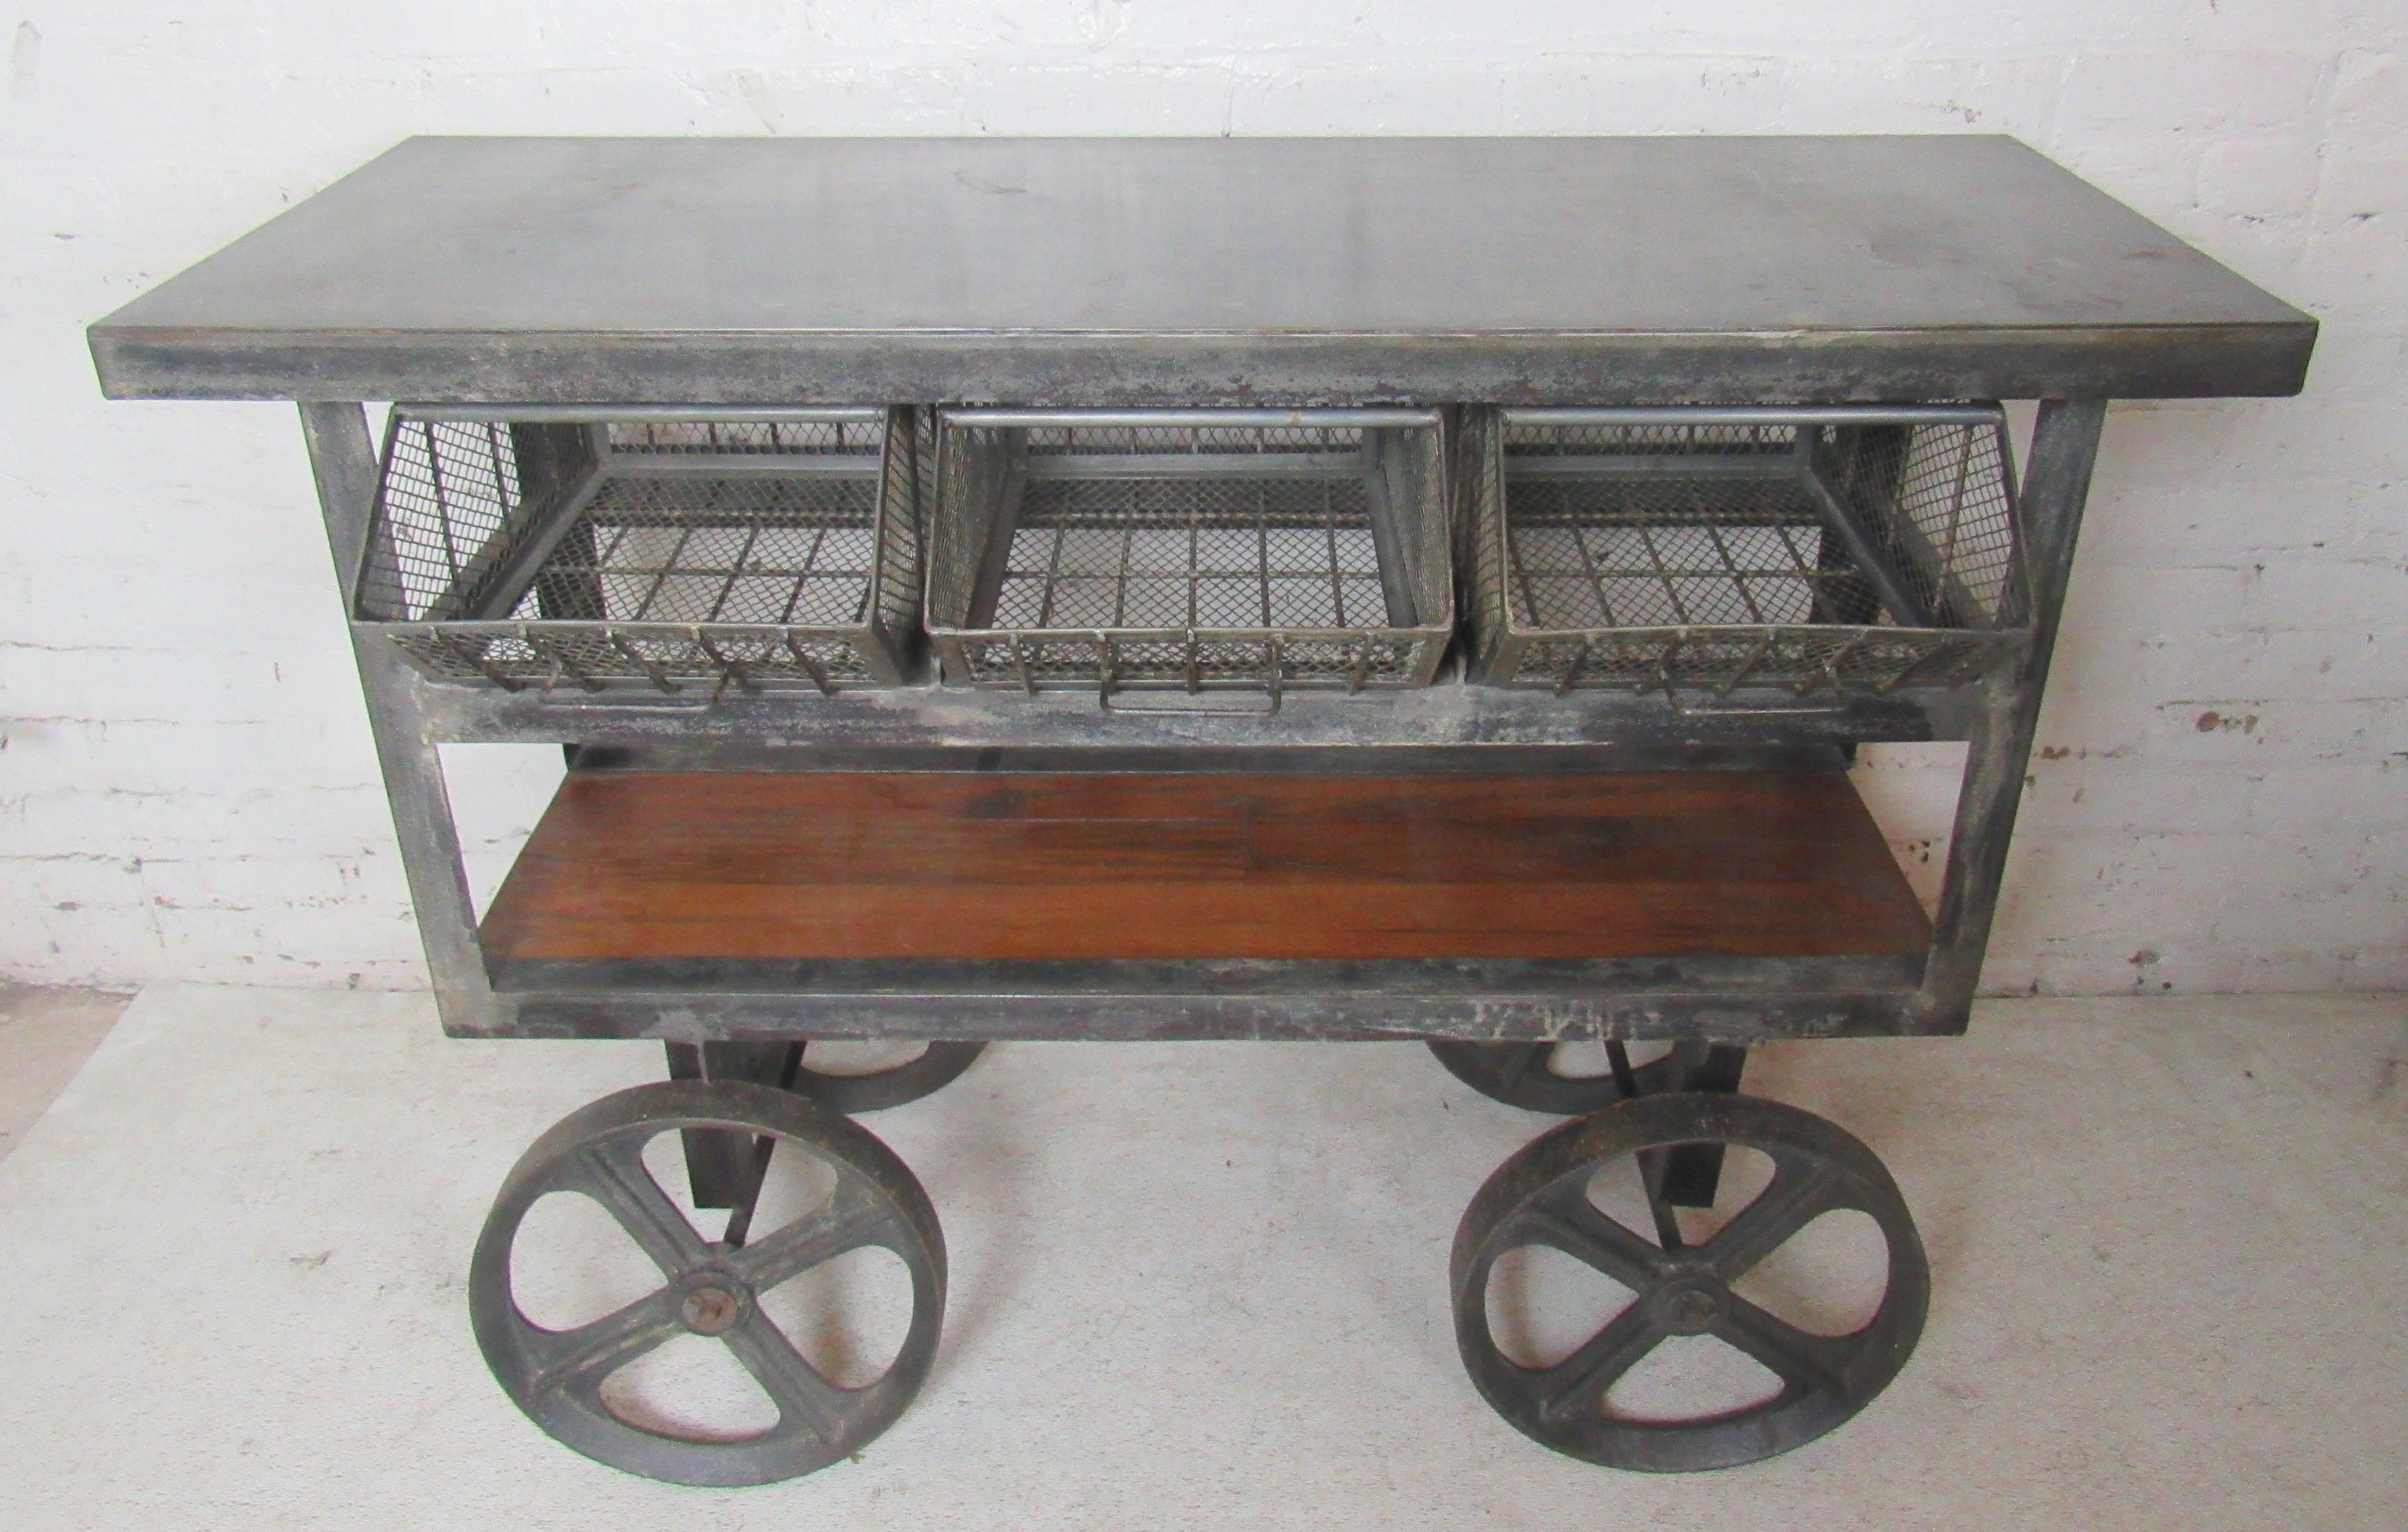 Industrial style cart for modern home use in kitchen or living room. Metal top, iron frame and wood shelving.
(Please confirm item location - NY or NJ - with dealer).
 